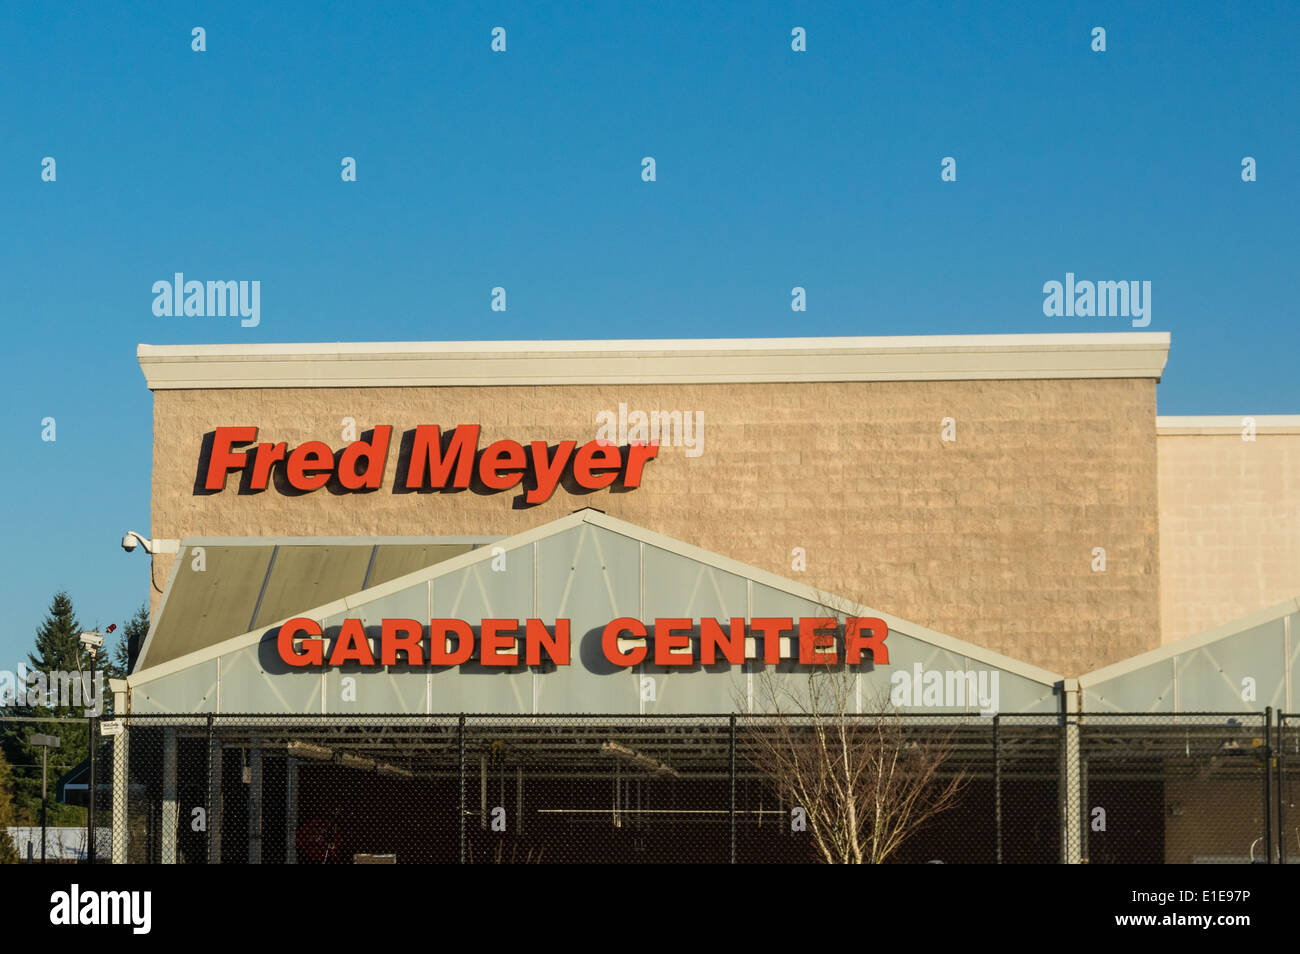 Fred Meyer is a large grocery chain store that also operates garden centers.  Sandy, Oregon Stock Photo